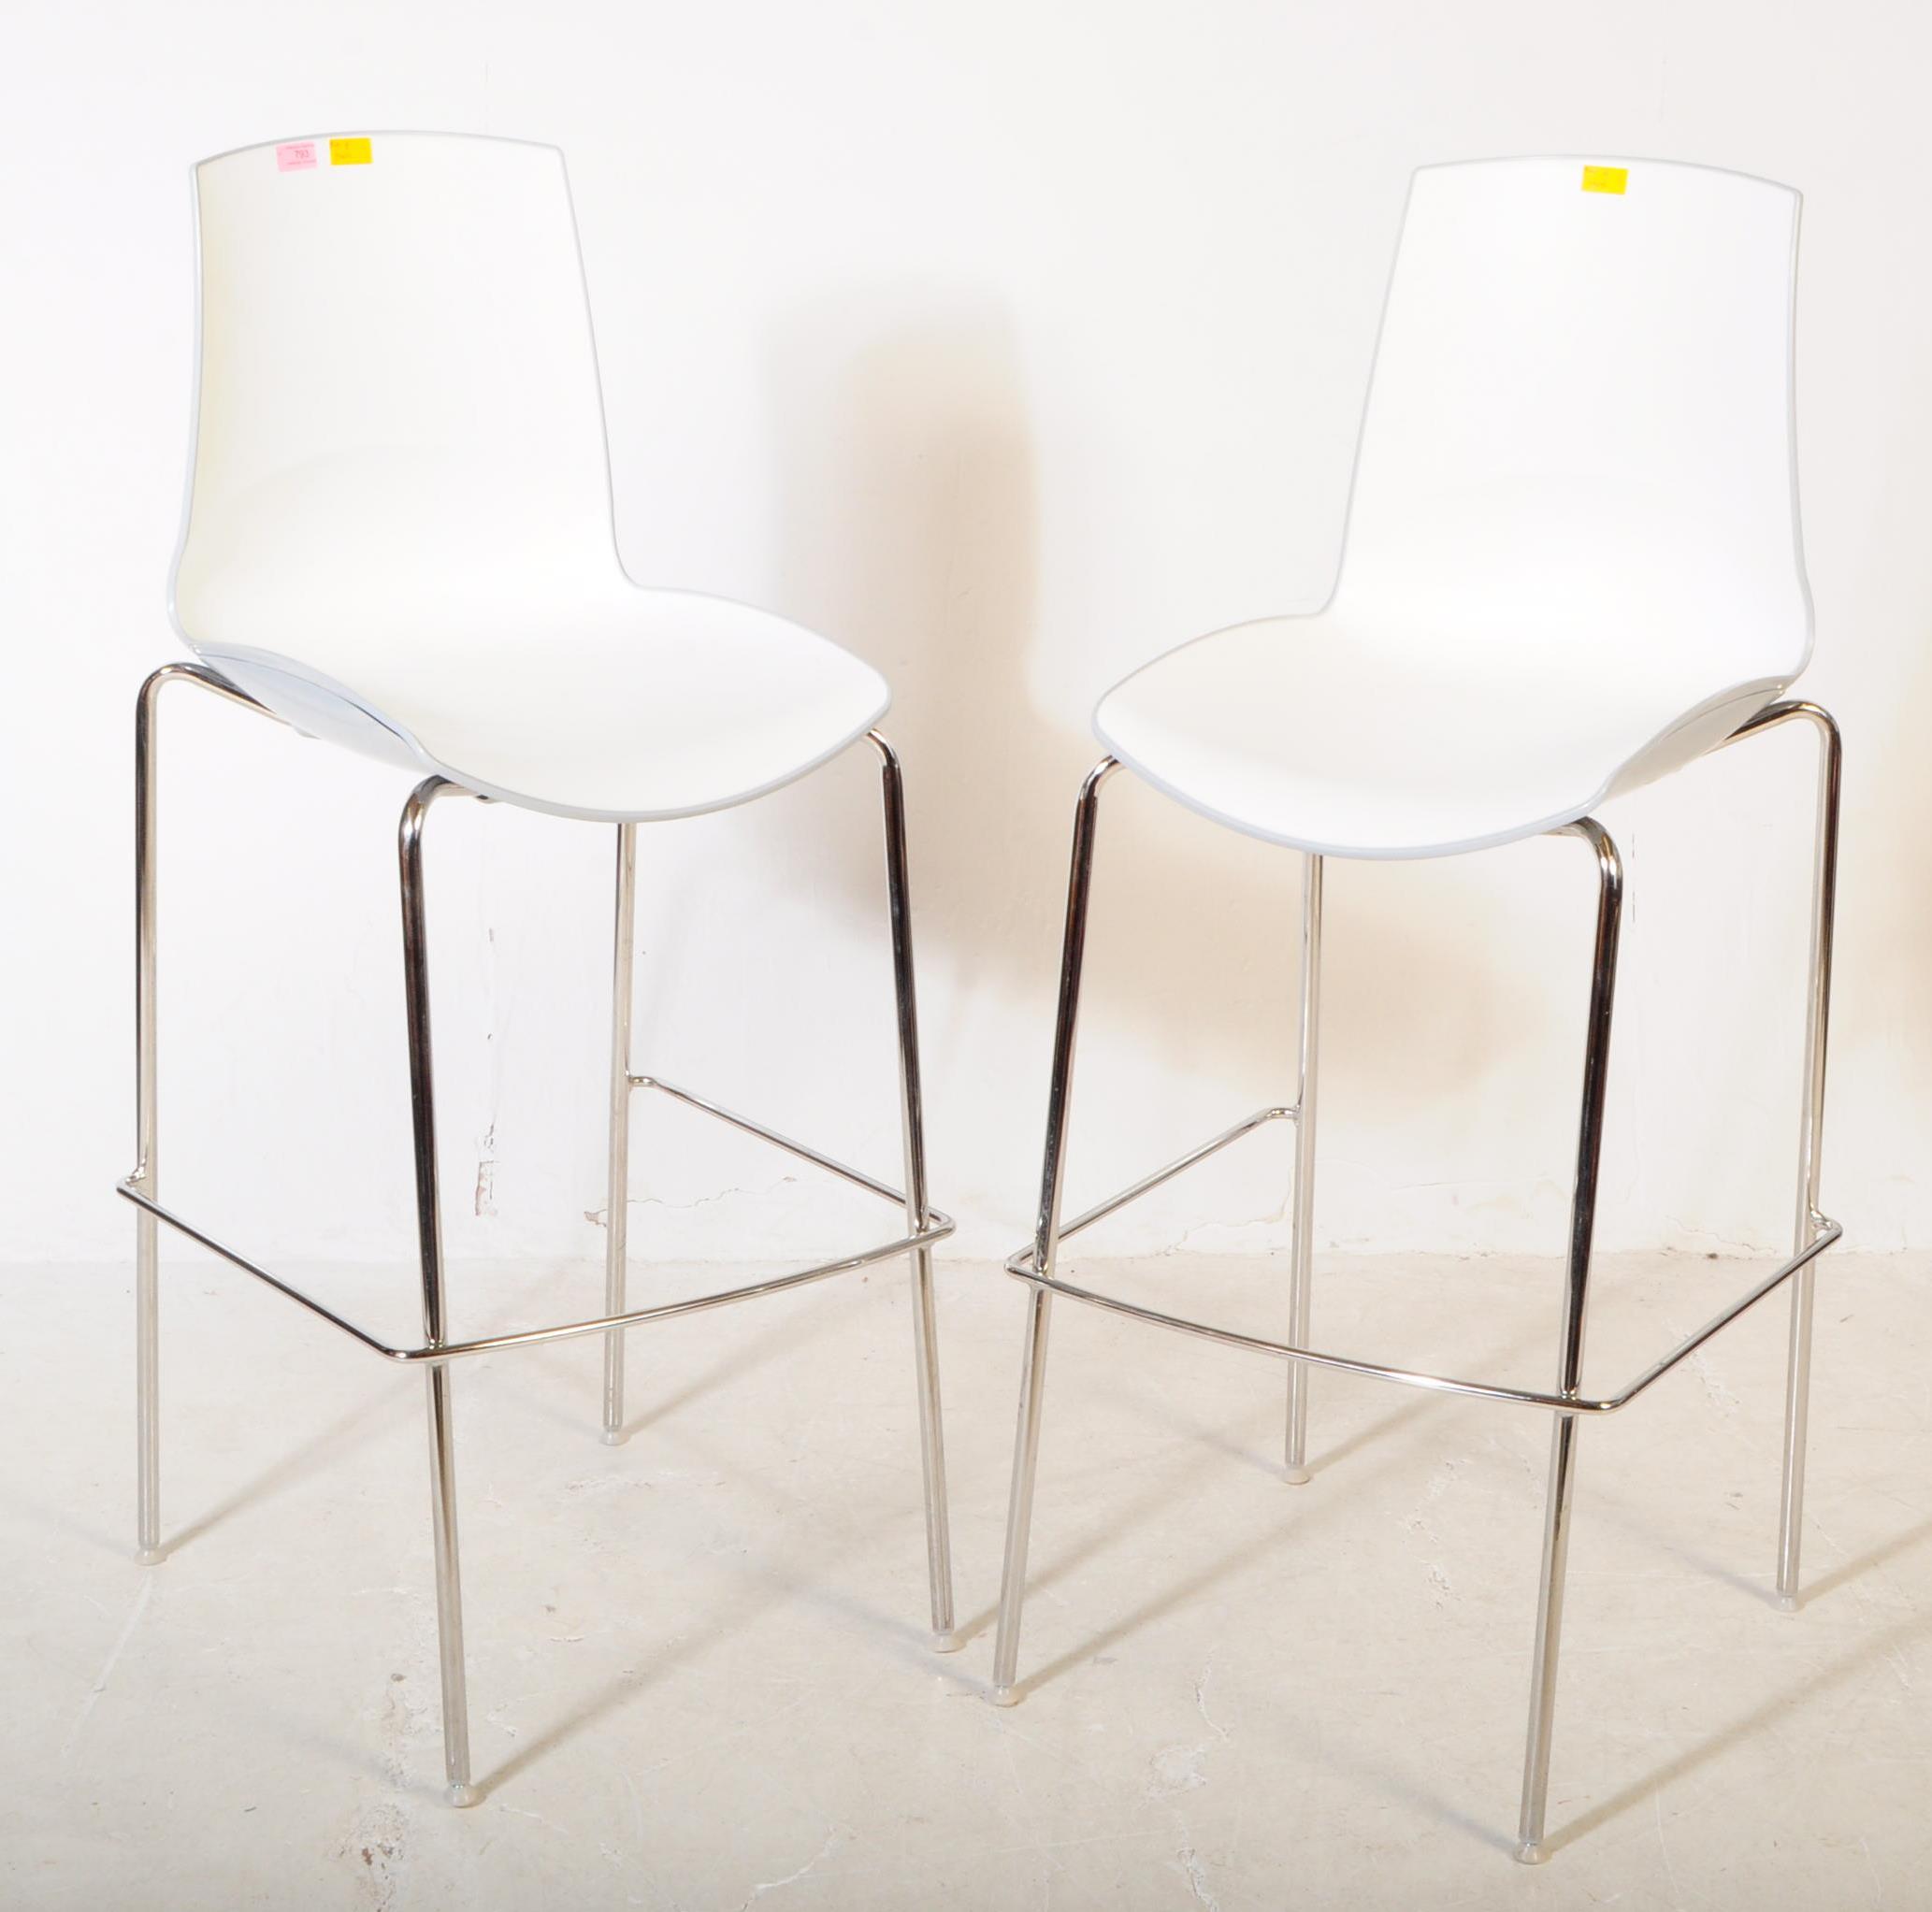 CONNECTION - PAIR OF CONTEMPORARY BREAKFAST BAR CHAIRS